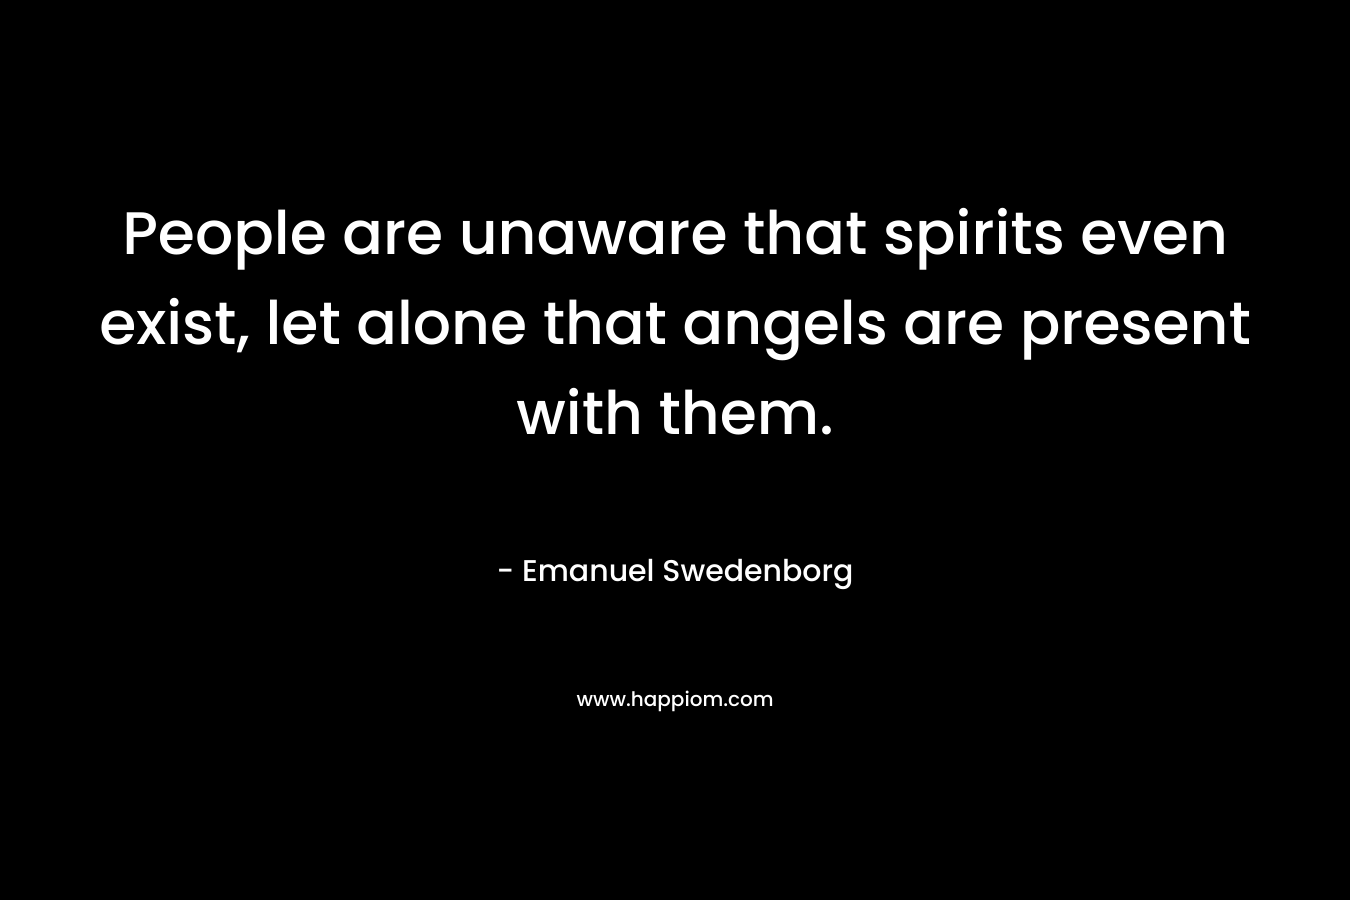 People are unaware that spirits even exist, let alone that angels are present with them. – Emanuel Swedenborg